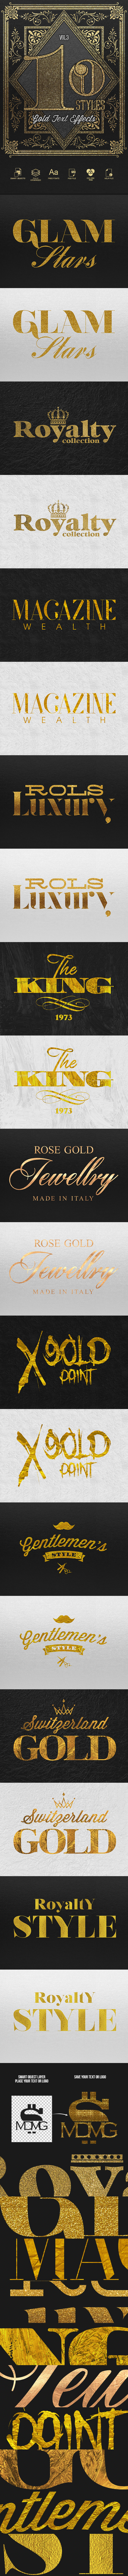 Gold Text Effect Styles